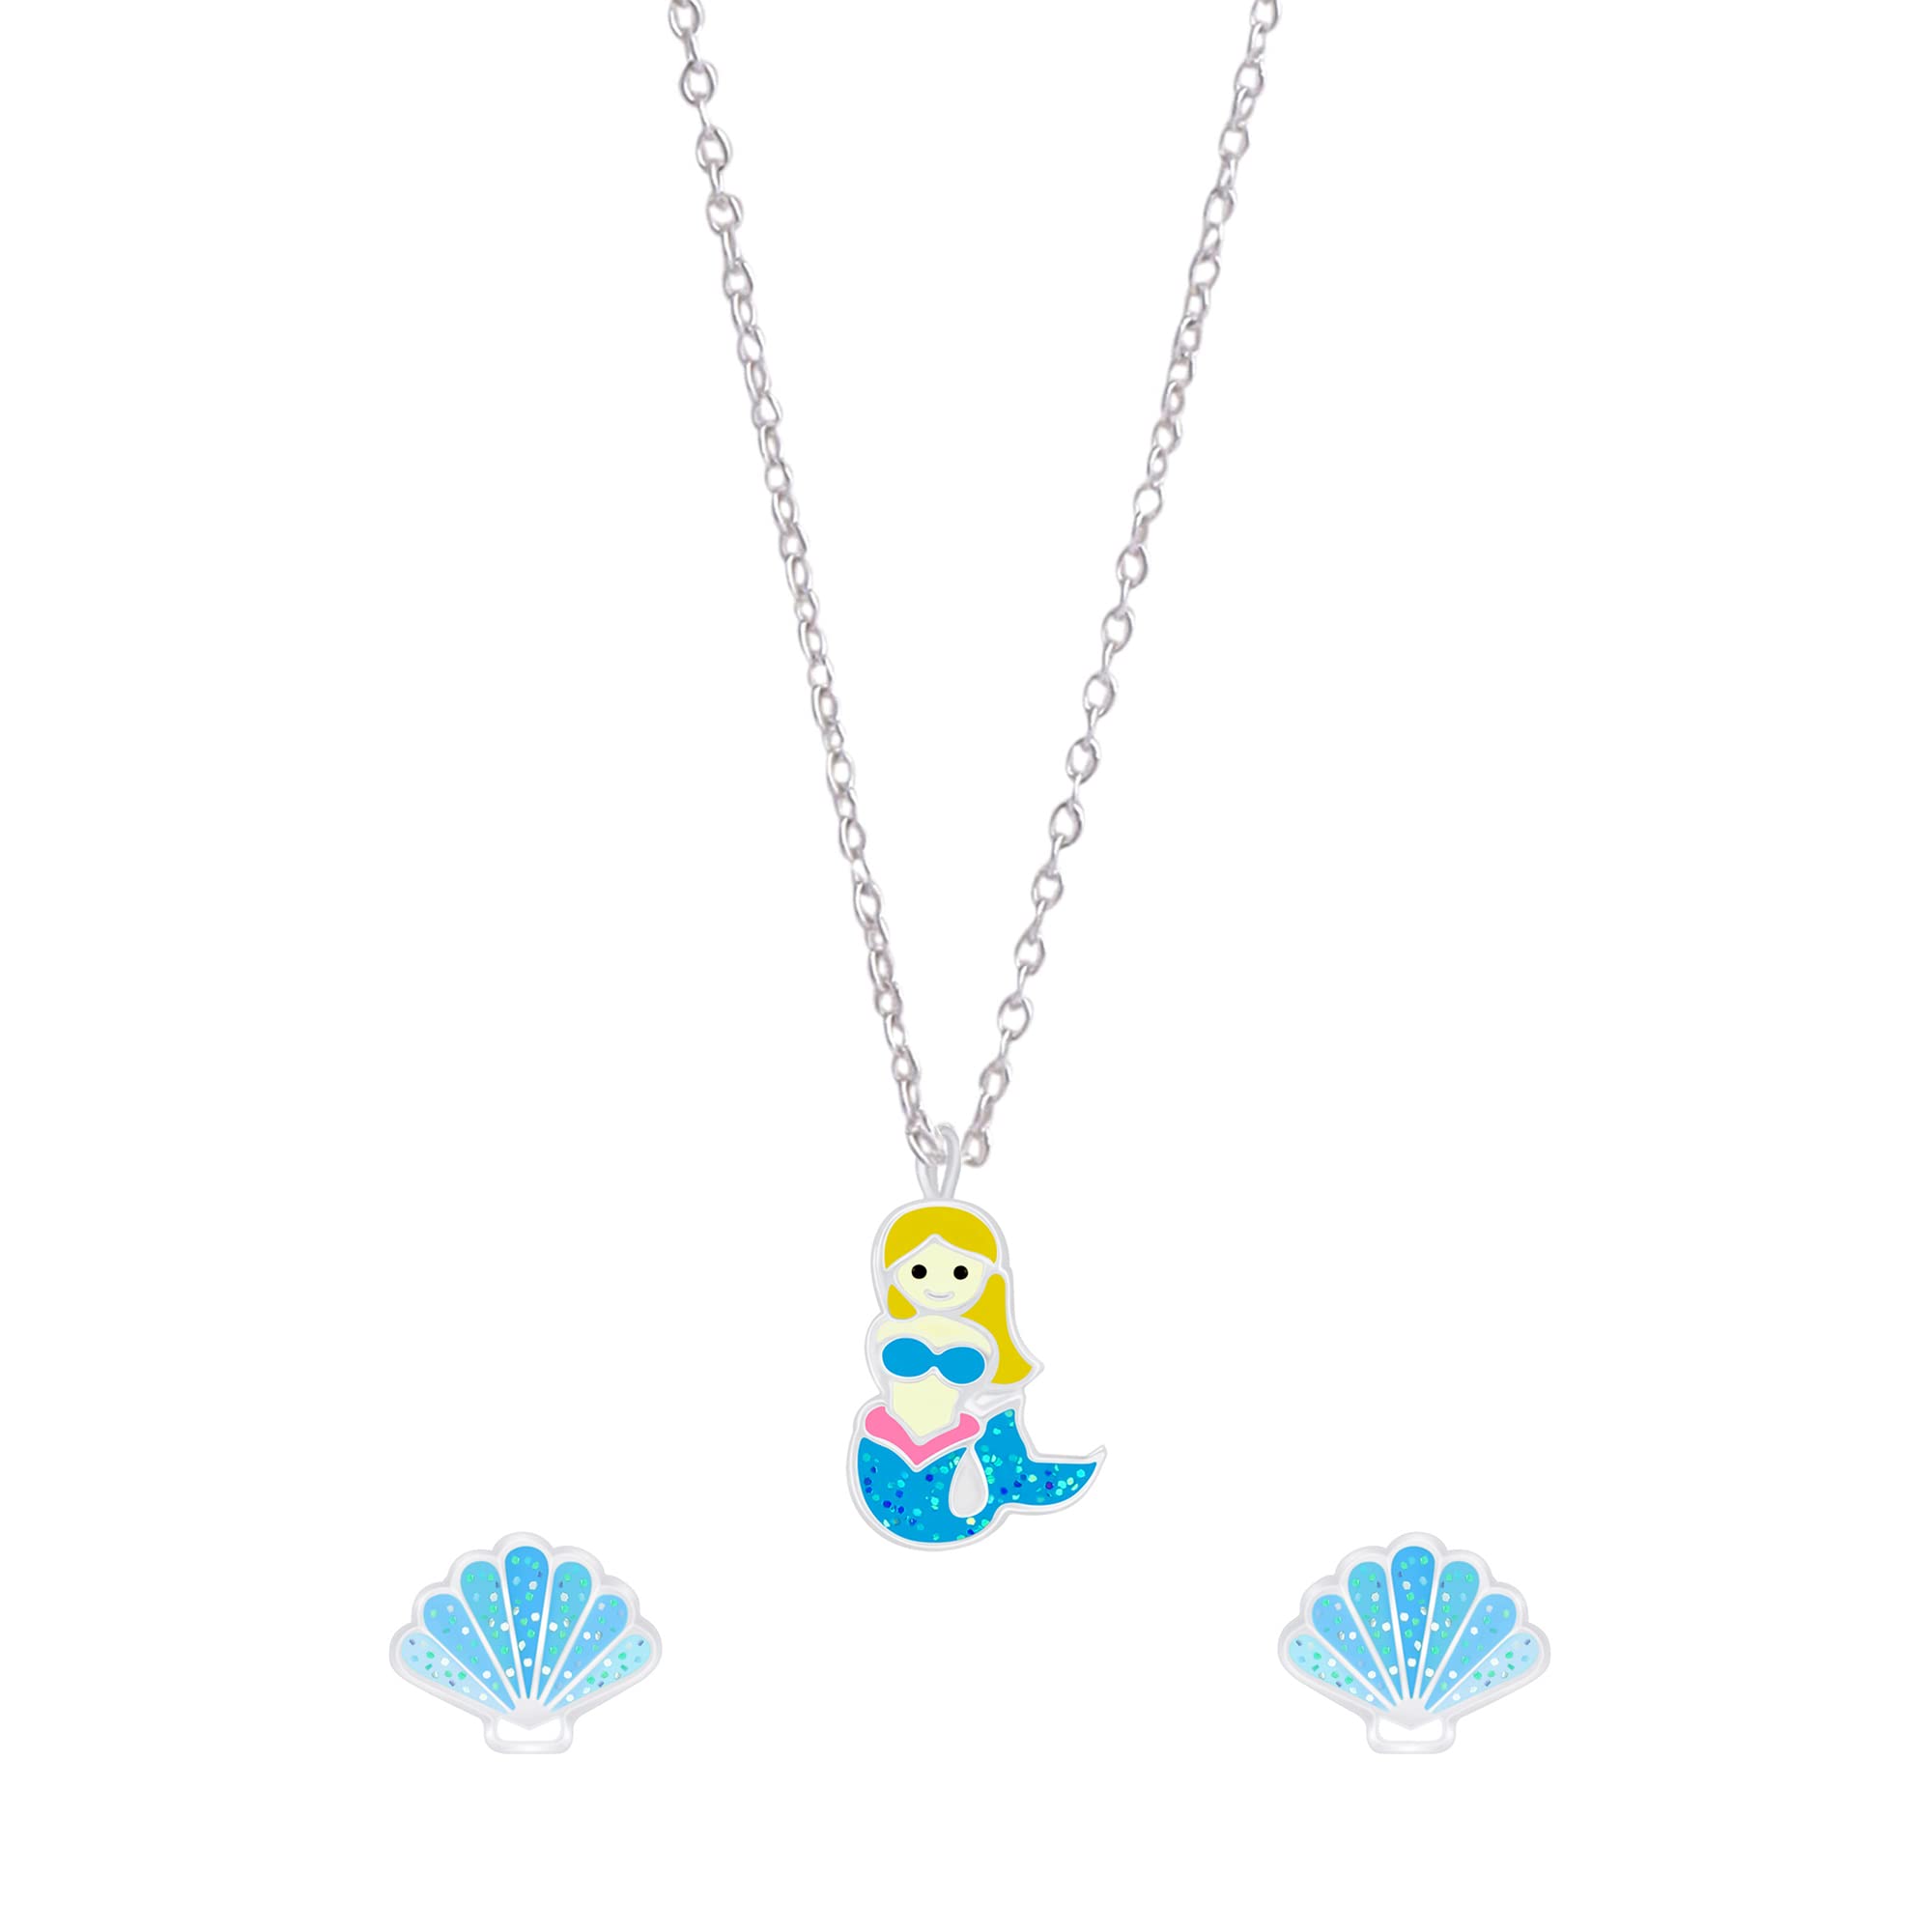 Raajsi by Yellow Chimes 925 Sterling Silver Pendant Set for Girls & Kids Melbees Kids Collection Mermaid Design | Birthday Gift for Girls Kids | With Certificate of Authenticity & 6 Month Warranty